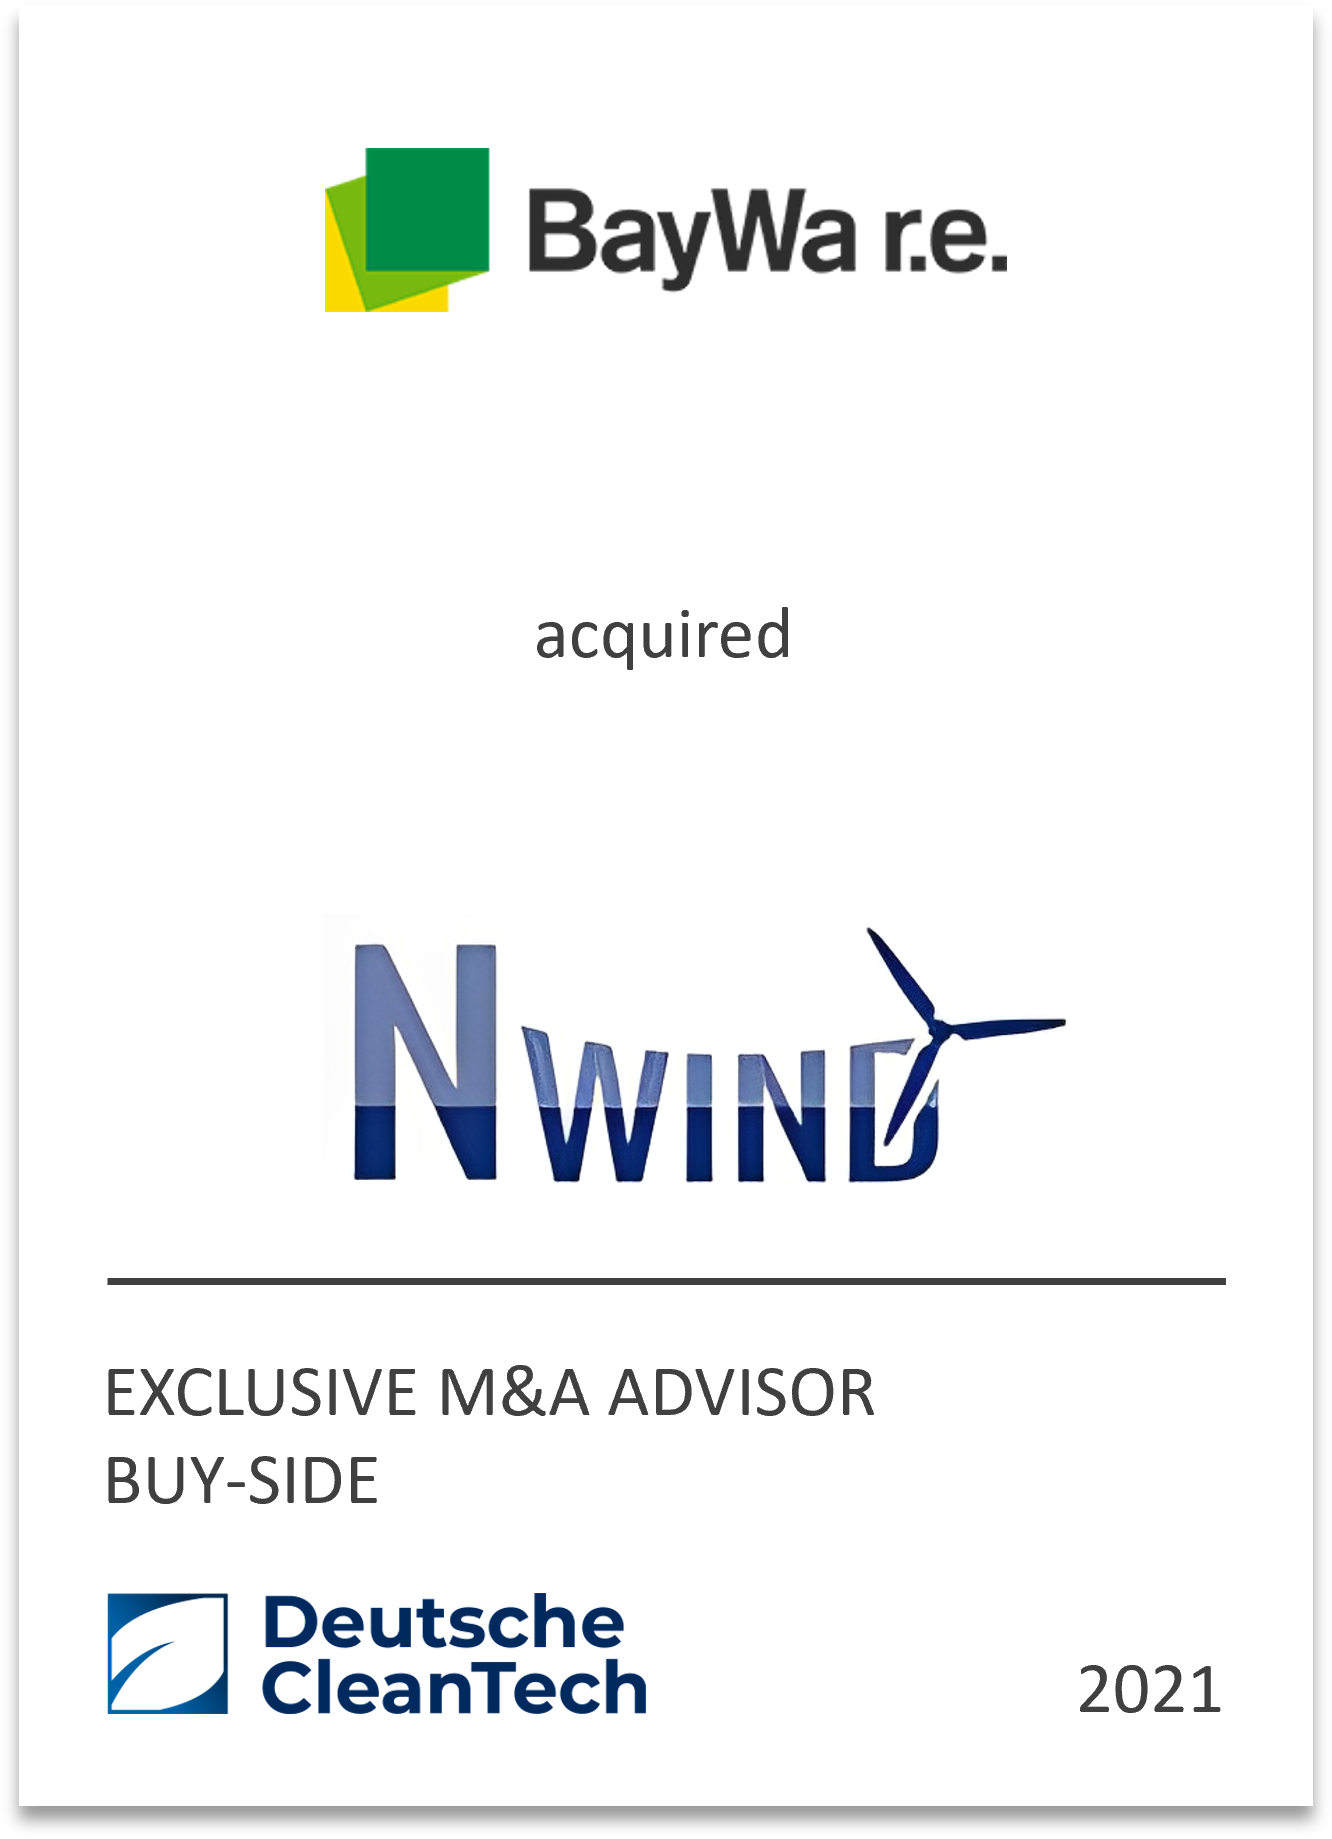 BayWa r.e, the Germany-based company engaged in the development, and operation of renewable energy, has acquired German wind energy developer NWind GmbH